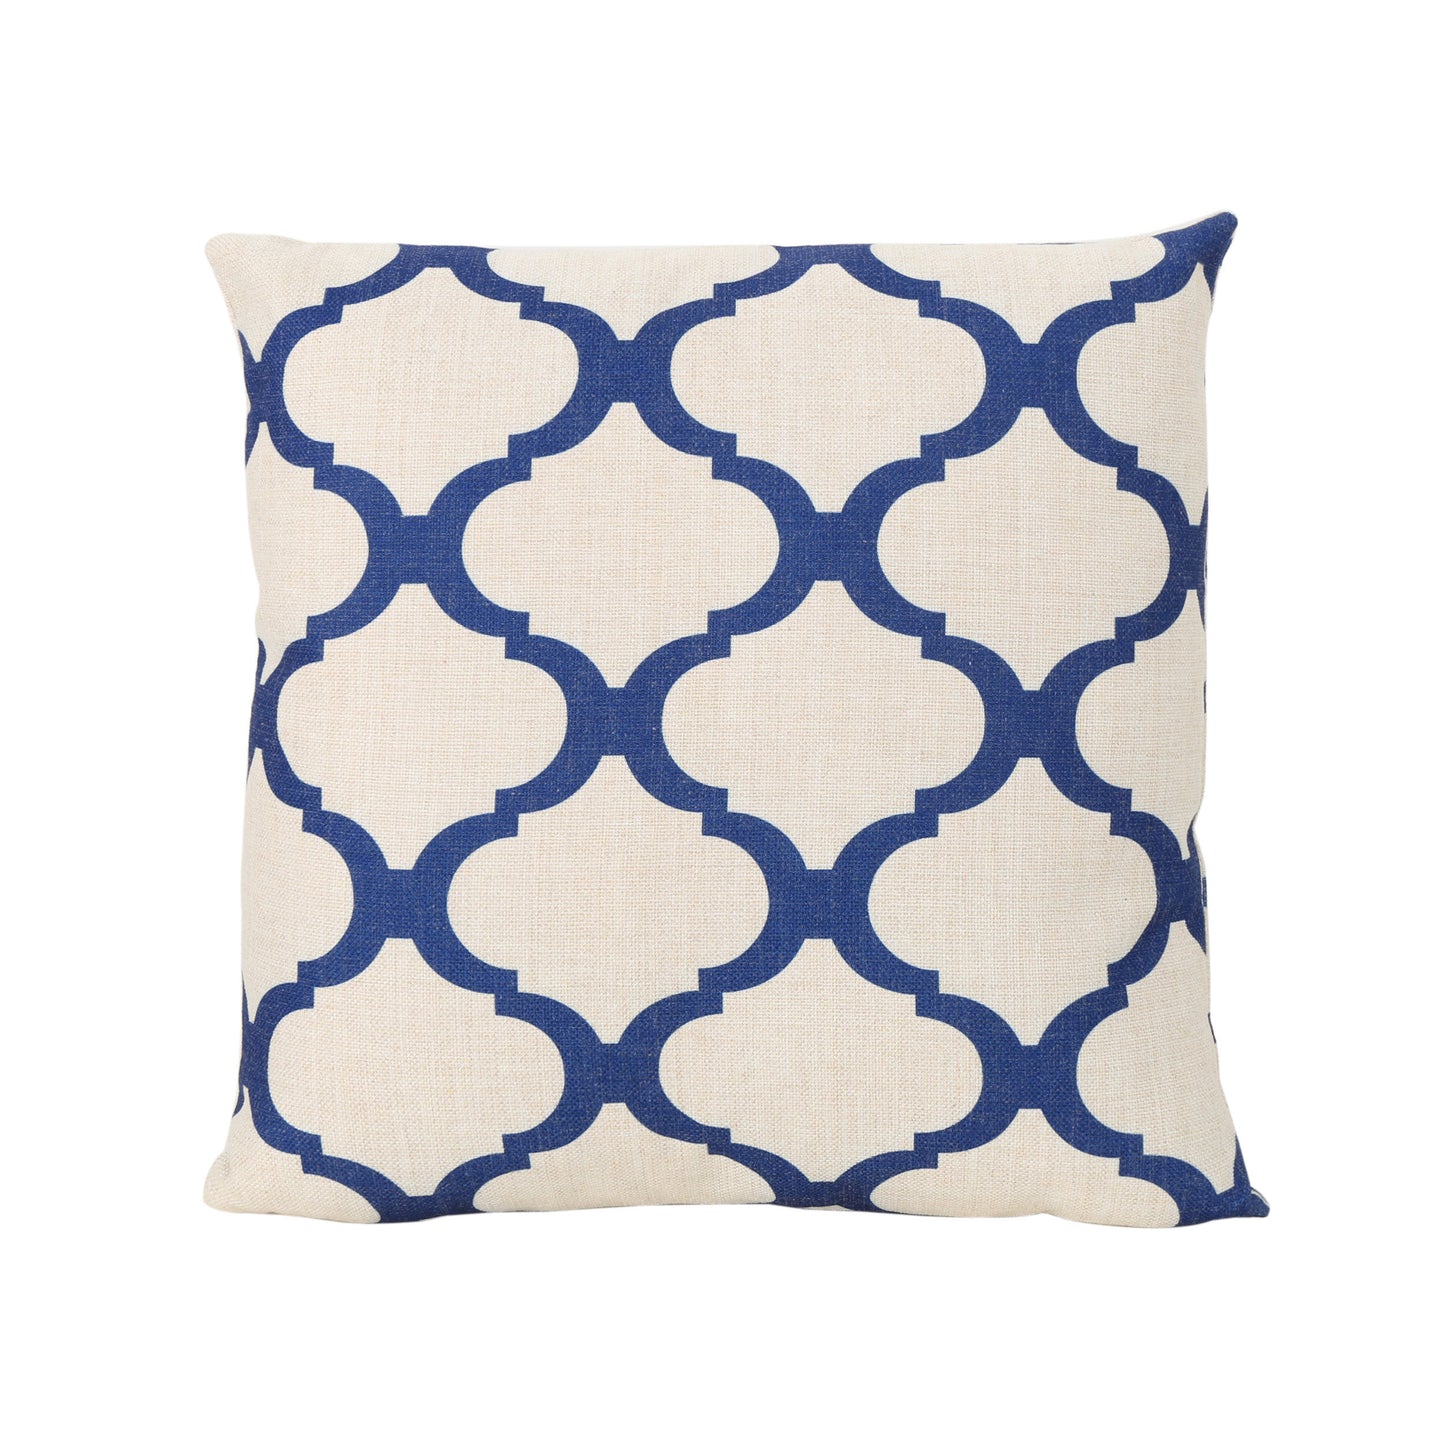 Isia Outdoor 18-inch Water Resistant Square Pillows, Blue on Beige